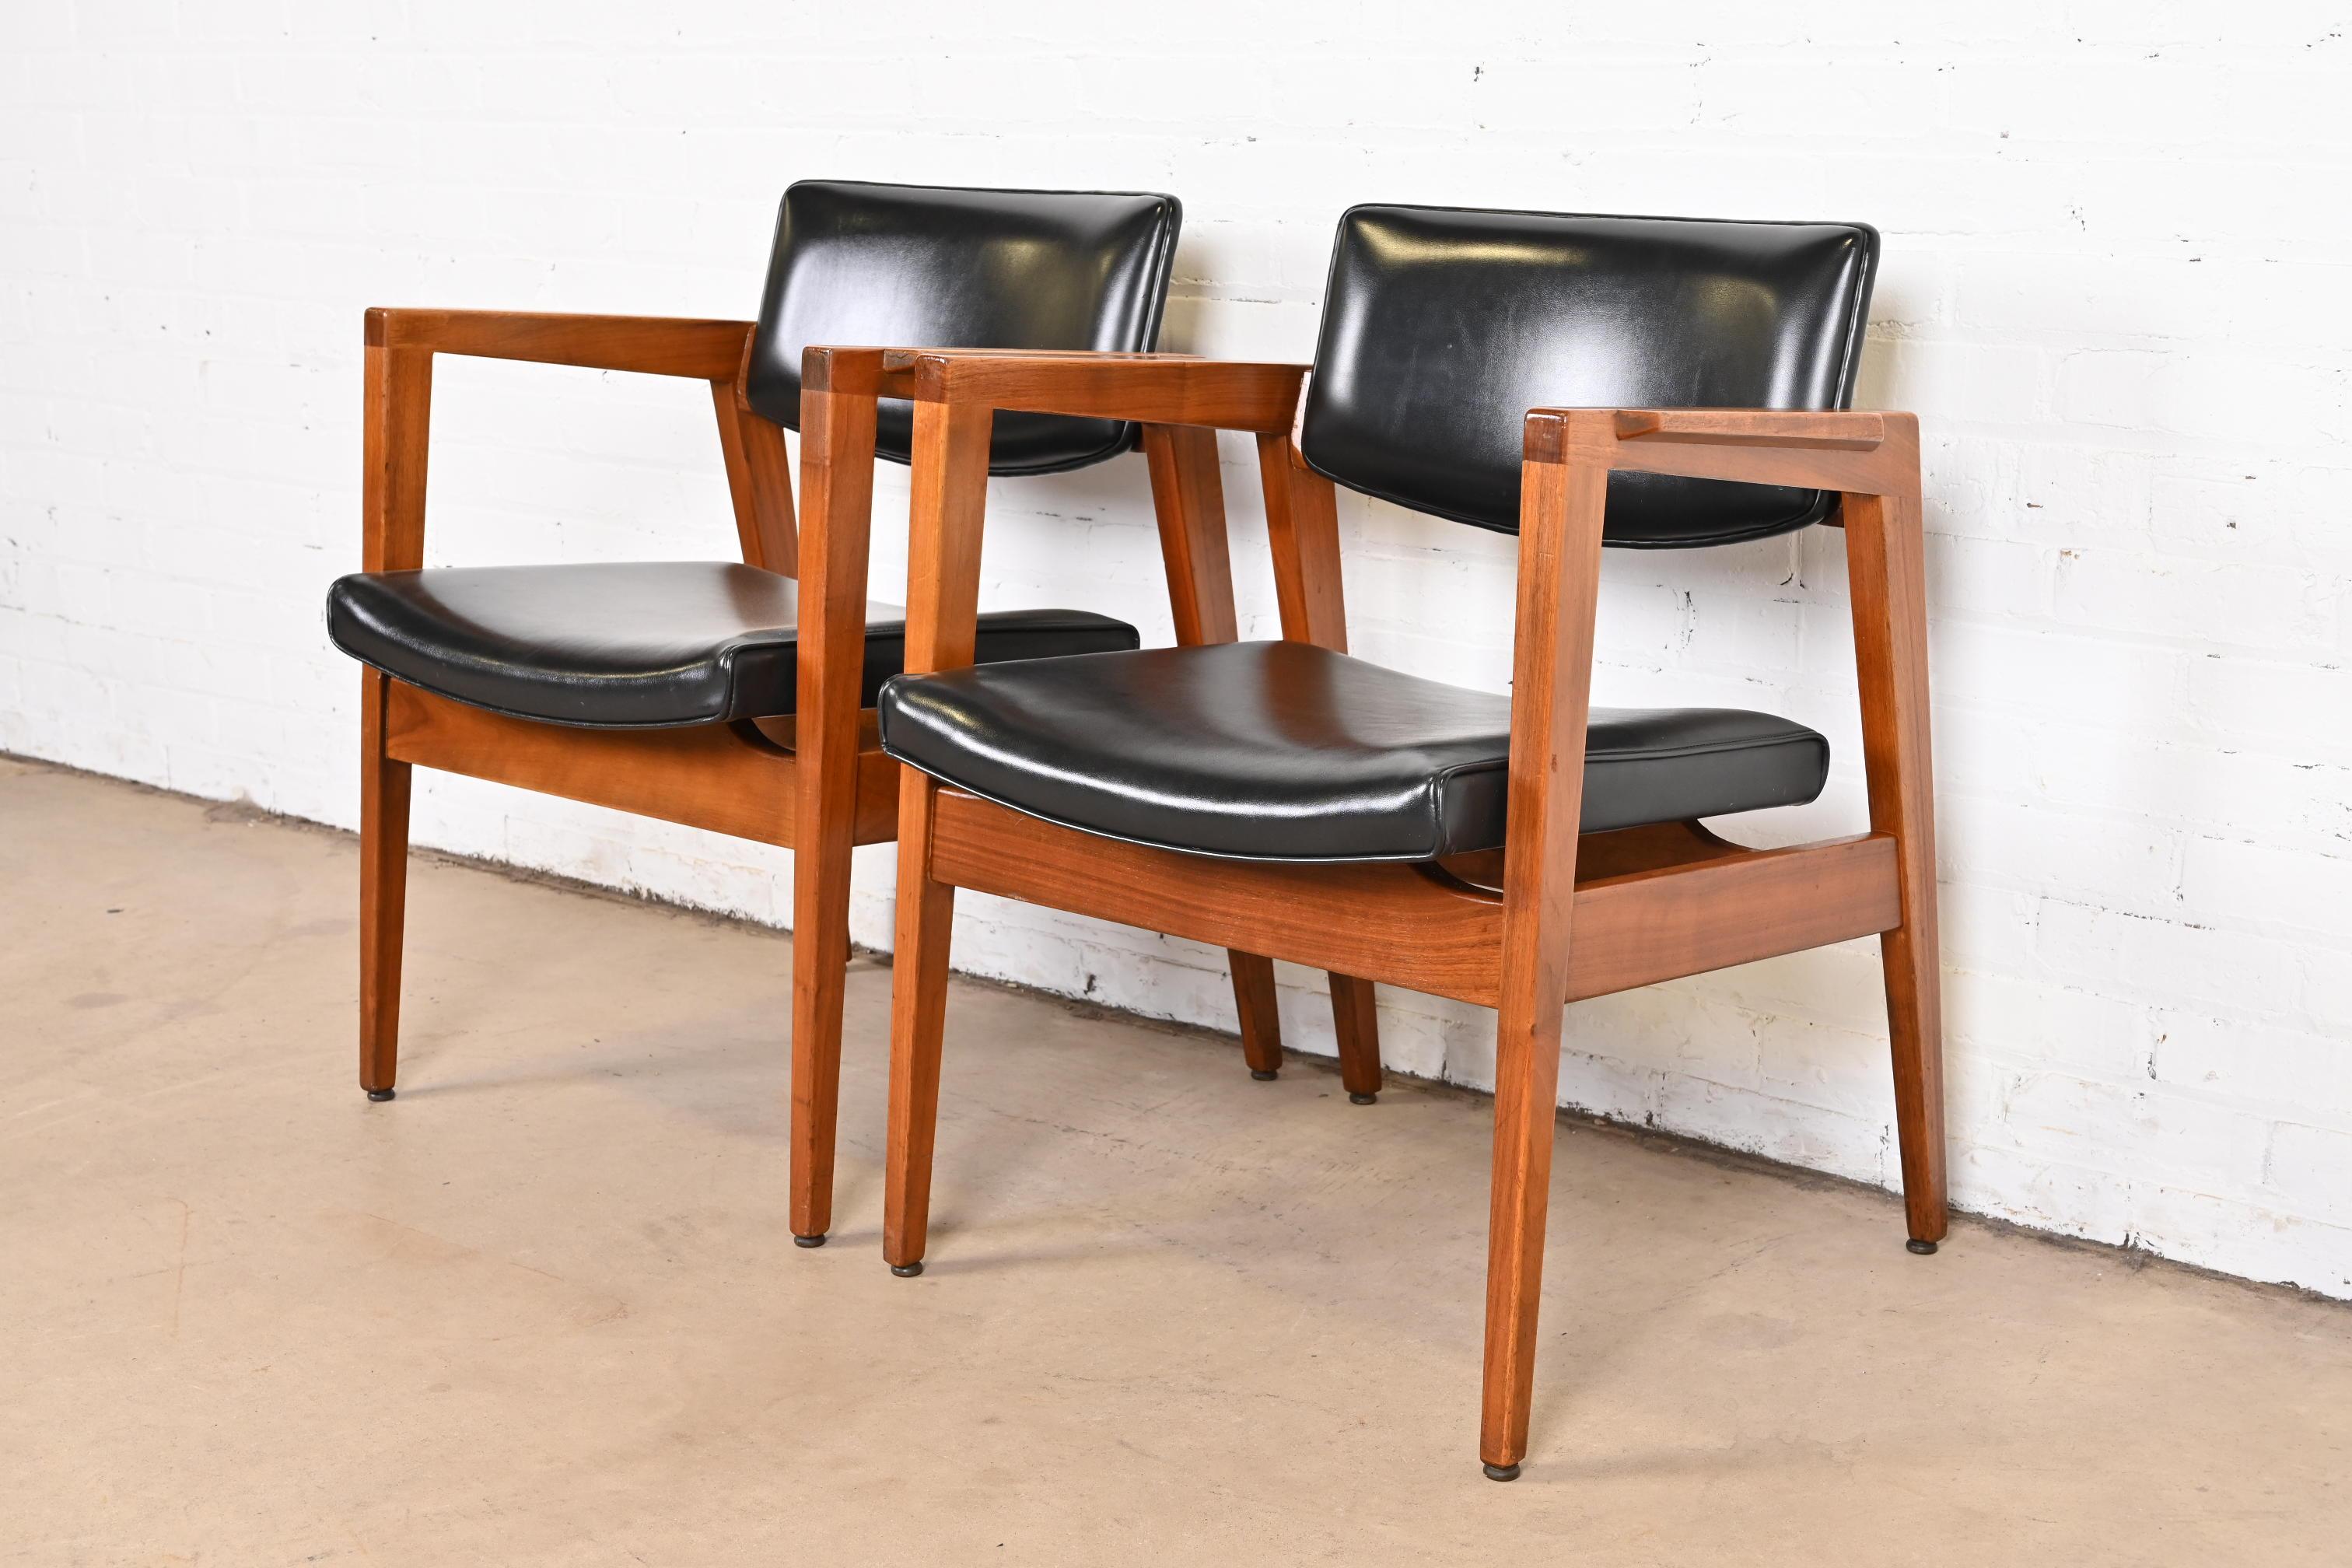 A sleek and stylish pair of Mid-Century Modern club chairs or lounge chairs

In the manner of Jens Risom

By Gunlocke

USA, 1960s

Gorgeous sculpted solid walnut frames, with original black vinyl upholstery.

Measures: 23.63